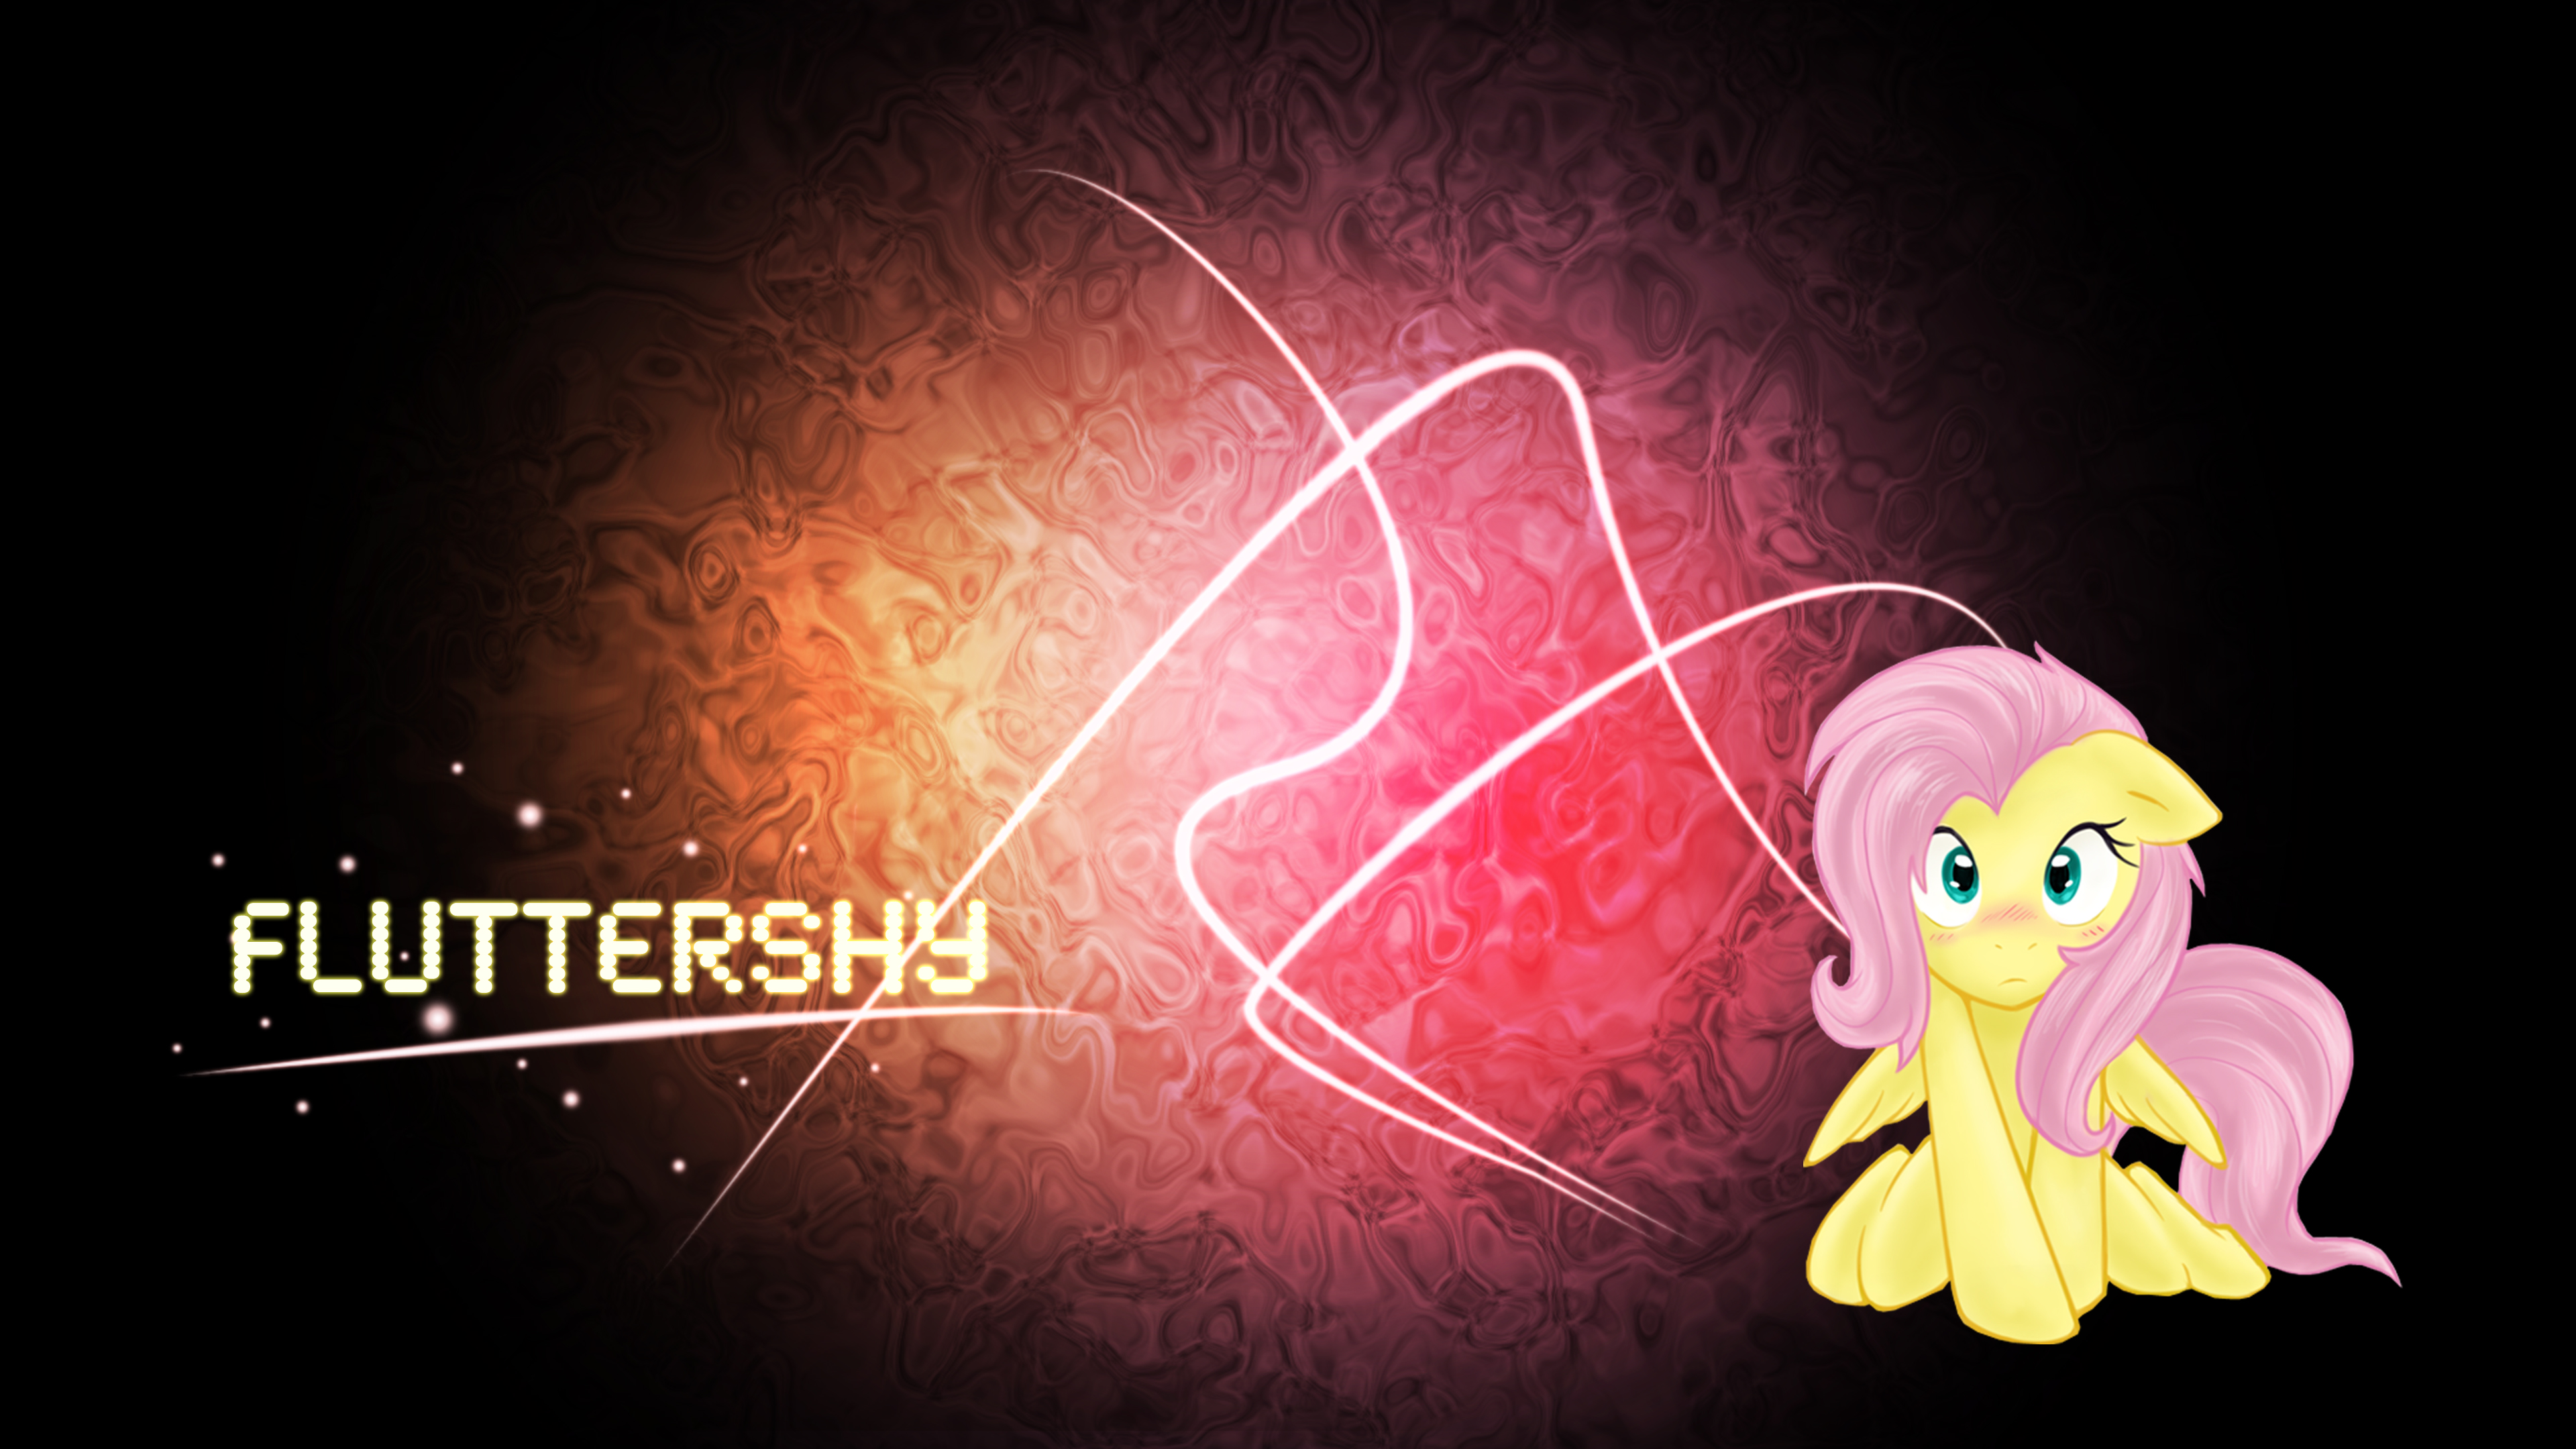 Fluttershy Wallpaper by Ambris and ExtrahoVinco